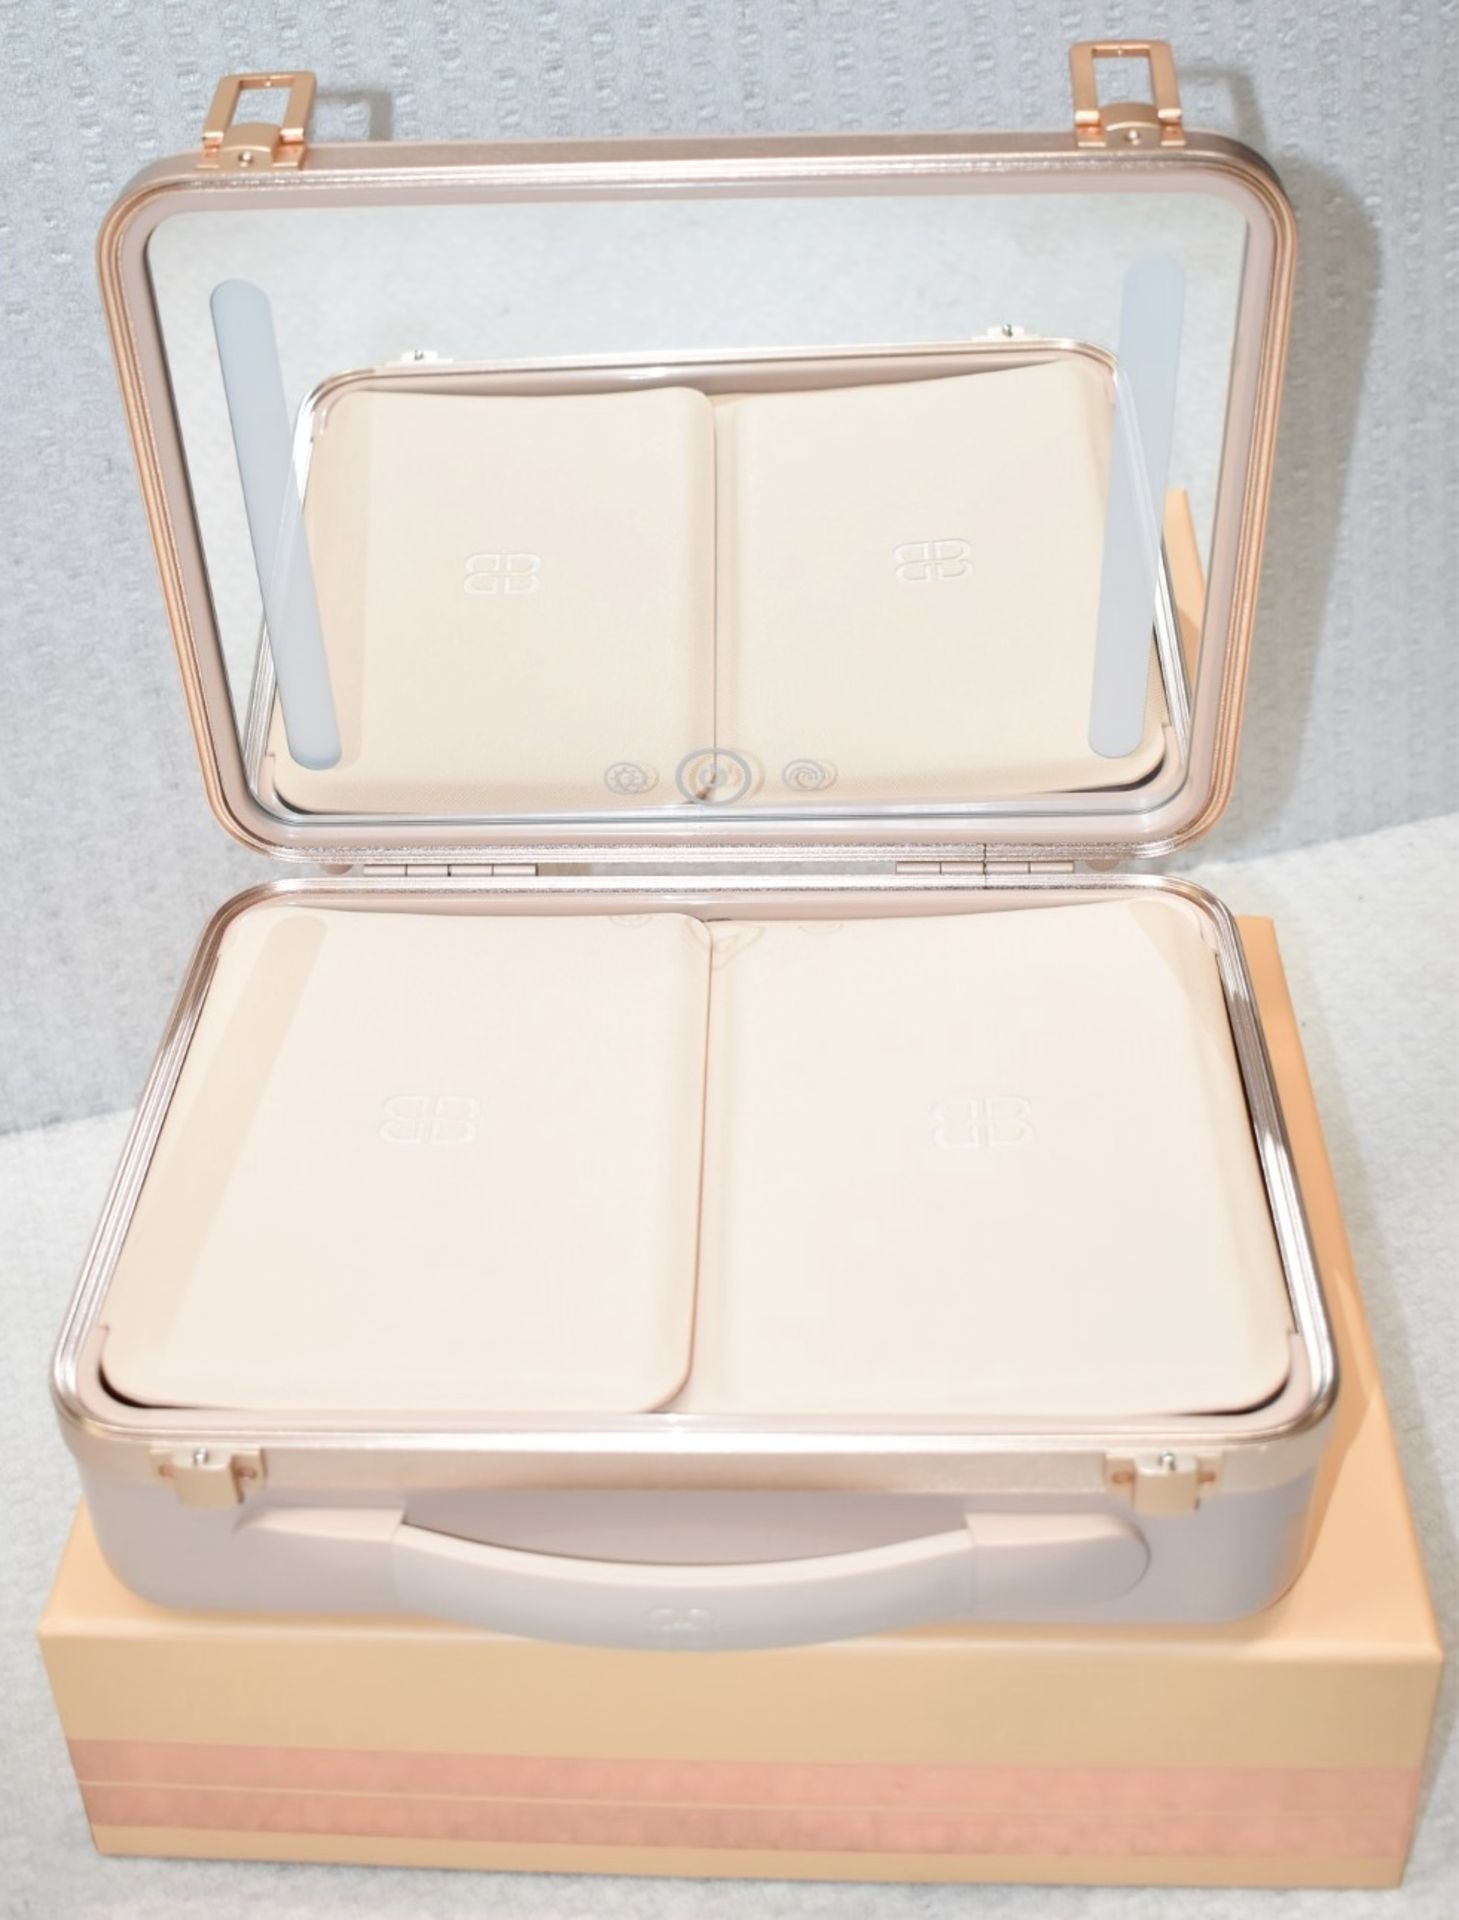 1 x BEAUTIFECT 'Beautifect Box' Make-Up Carry Case With Built-in Mirror - RRP £279.00 - Image 12 of 13